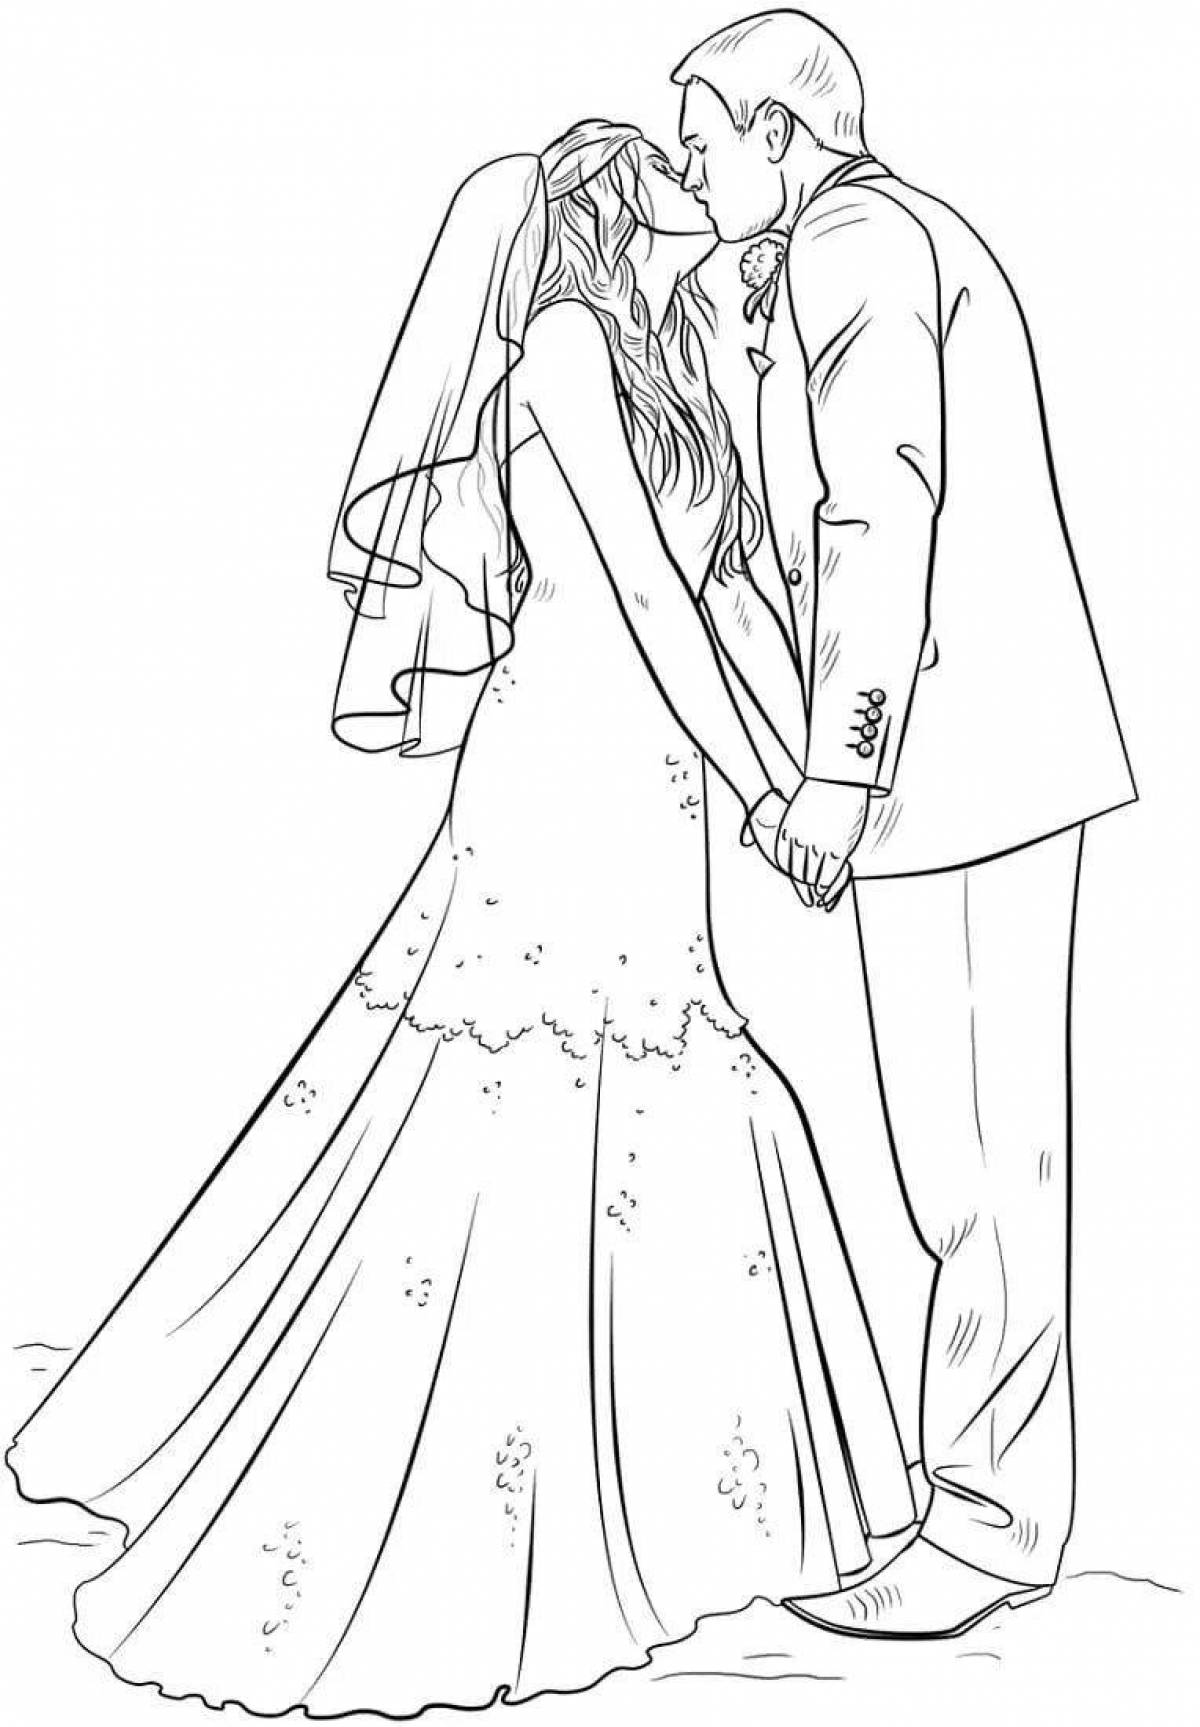 Coloring page playful wife and husband